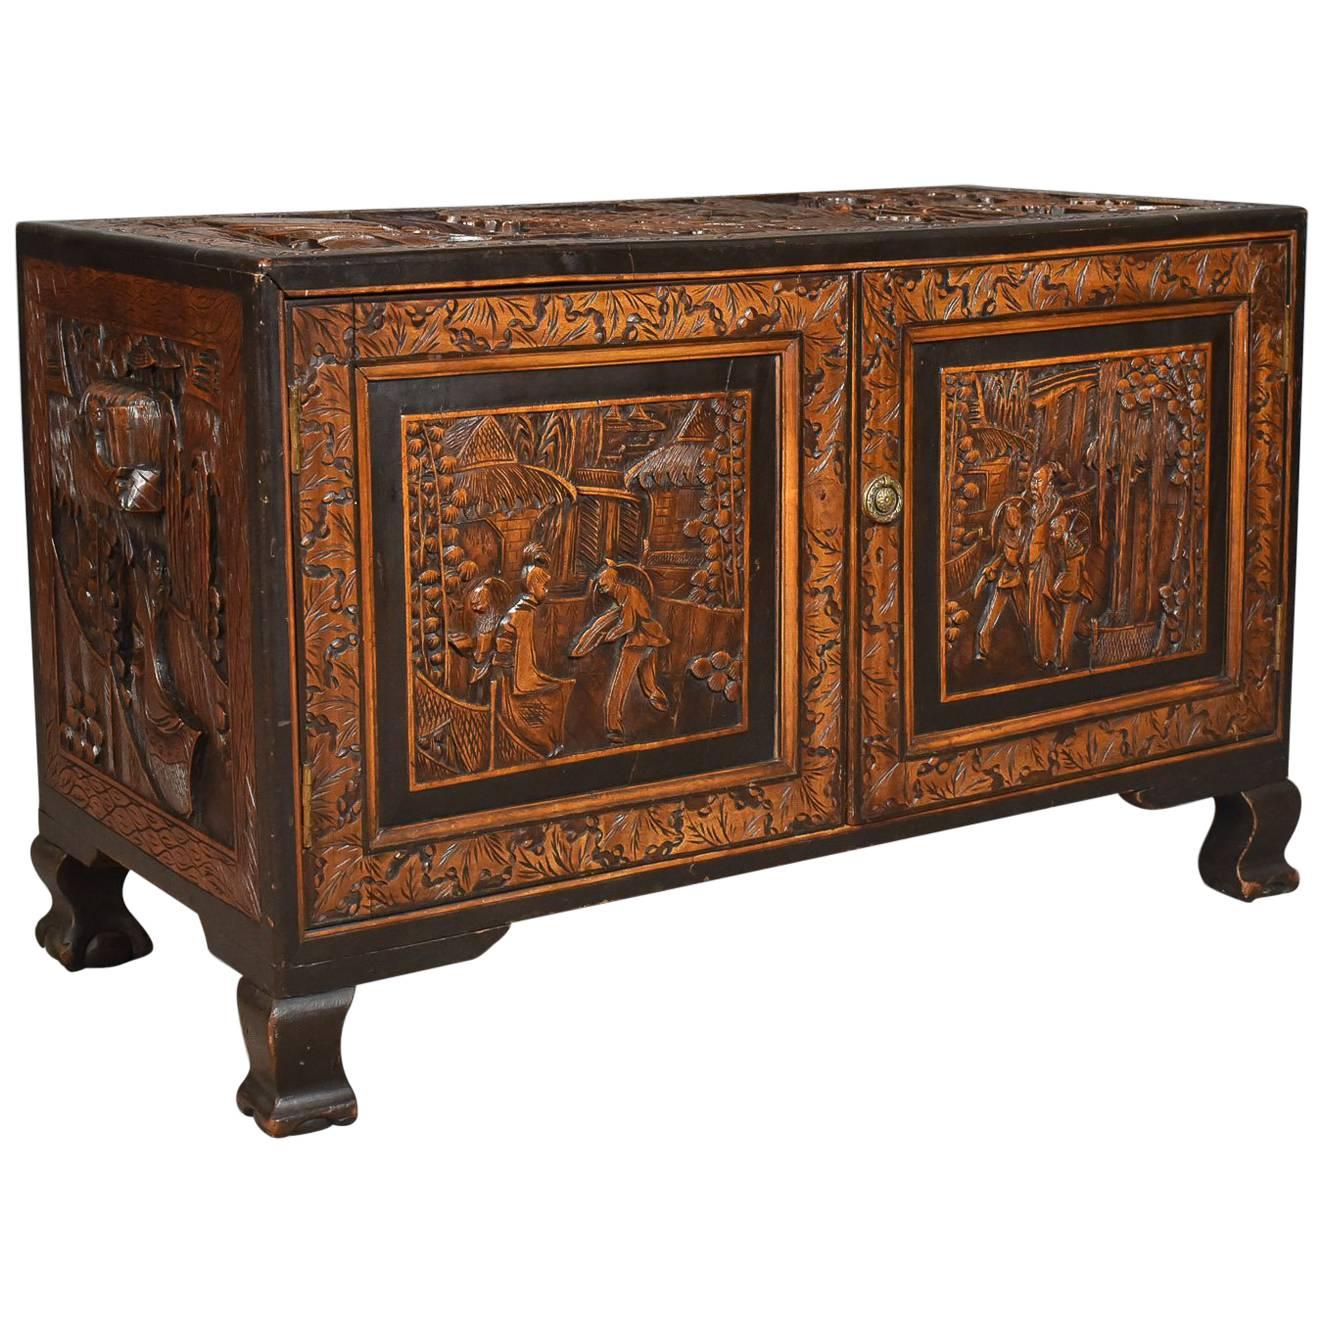 Early 20th Century Camphor Wood Chest, Oriental Carved Trunk